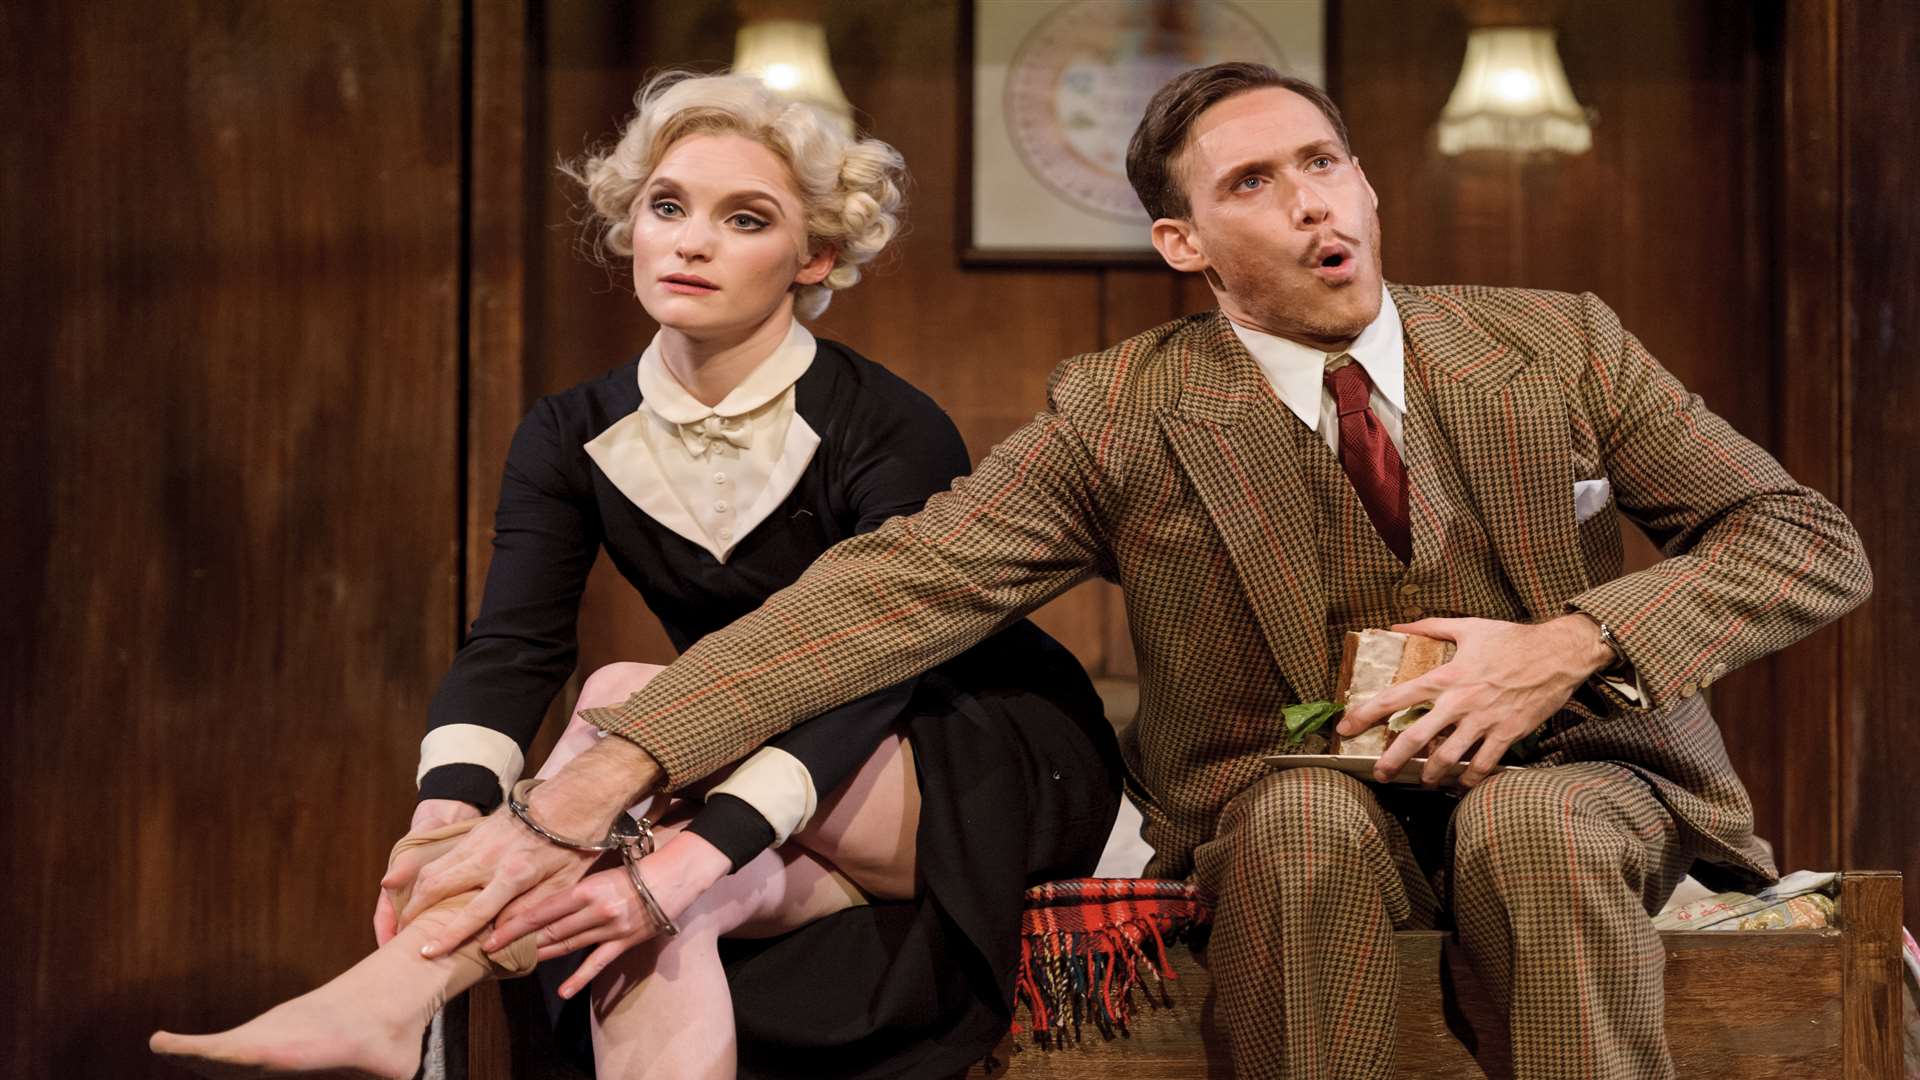 Richard Ede, as Richard Hannay and Olivia Greene, in one of the three character roles she plays in the comedic version of 39 Steps playing at The Orchard Theatre